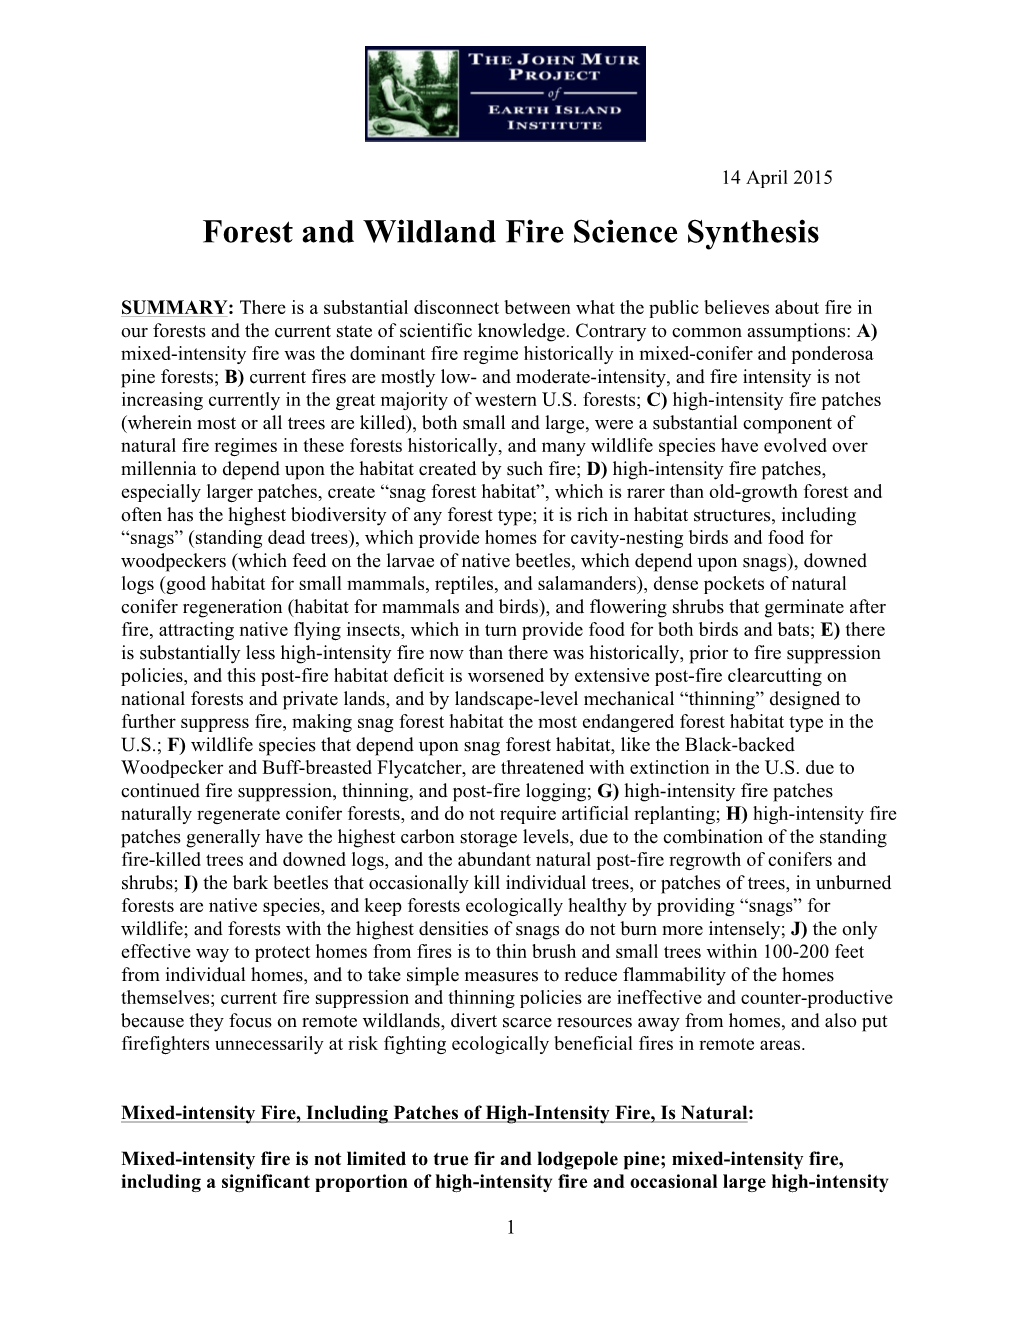 Forest and Wildland Fire Science Synthesis: Sierra Nevada